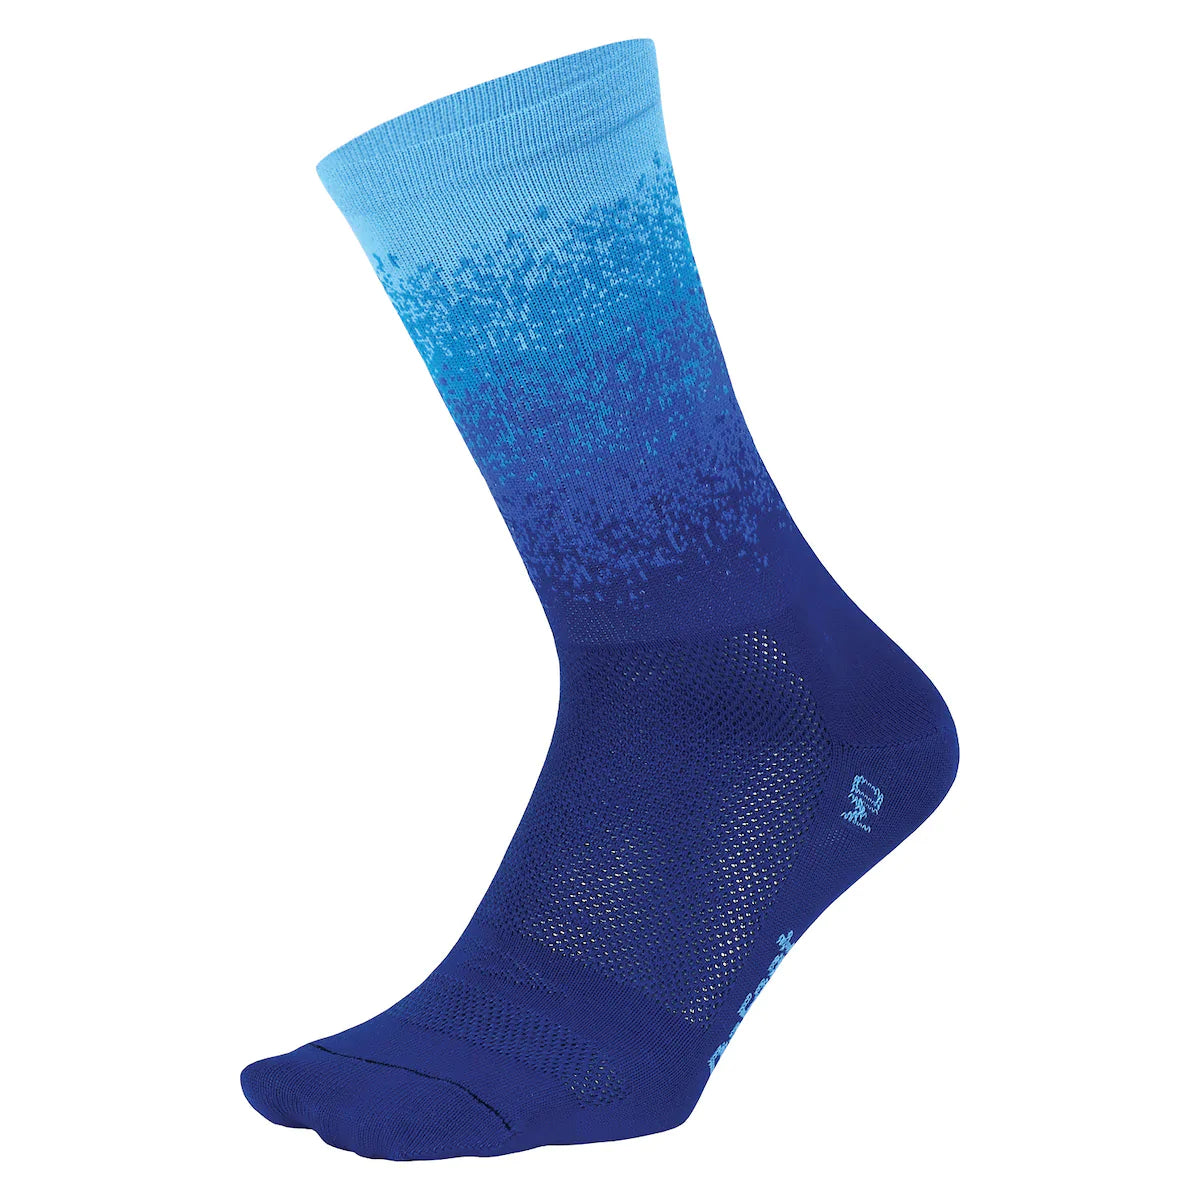 DeFeet Aireator Barnstormer Ombre cycling sock featuring a 6" cuff and a design of several bands of shades of blue fading into each other.